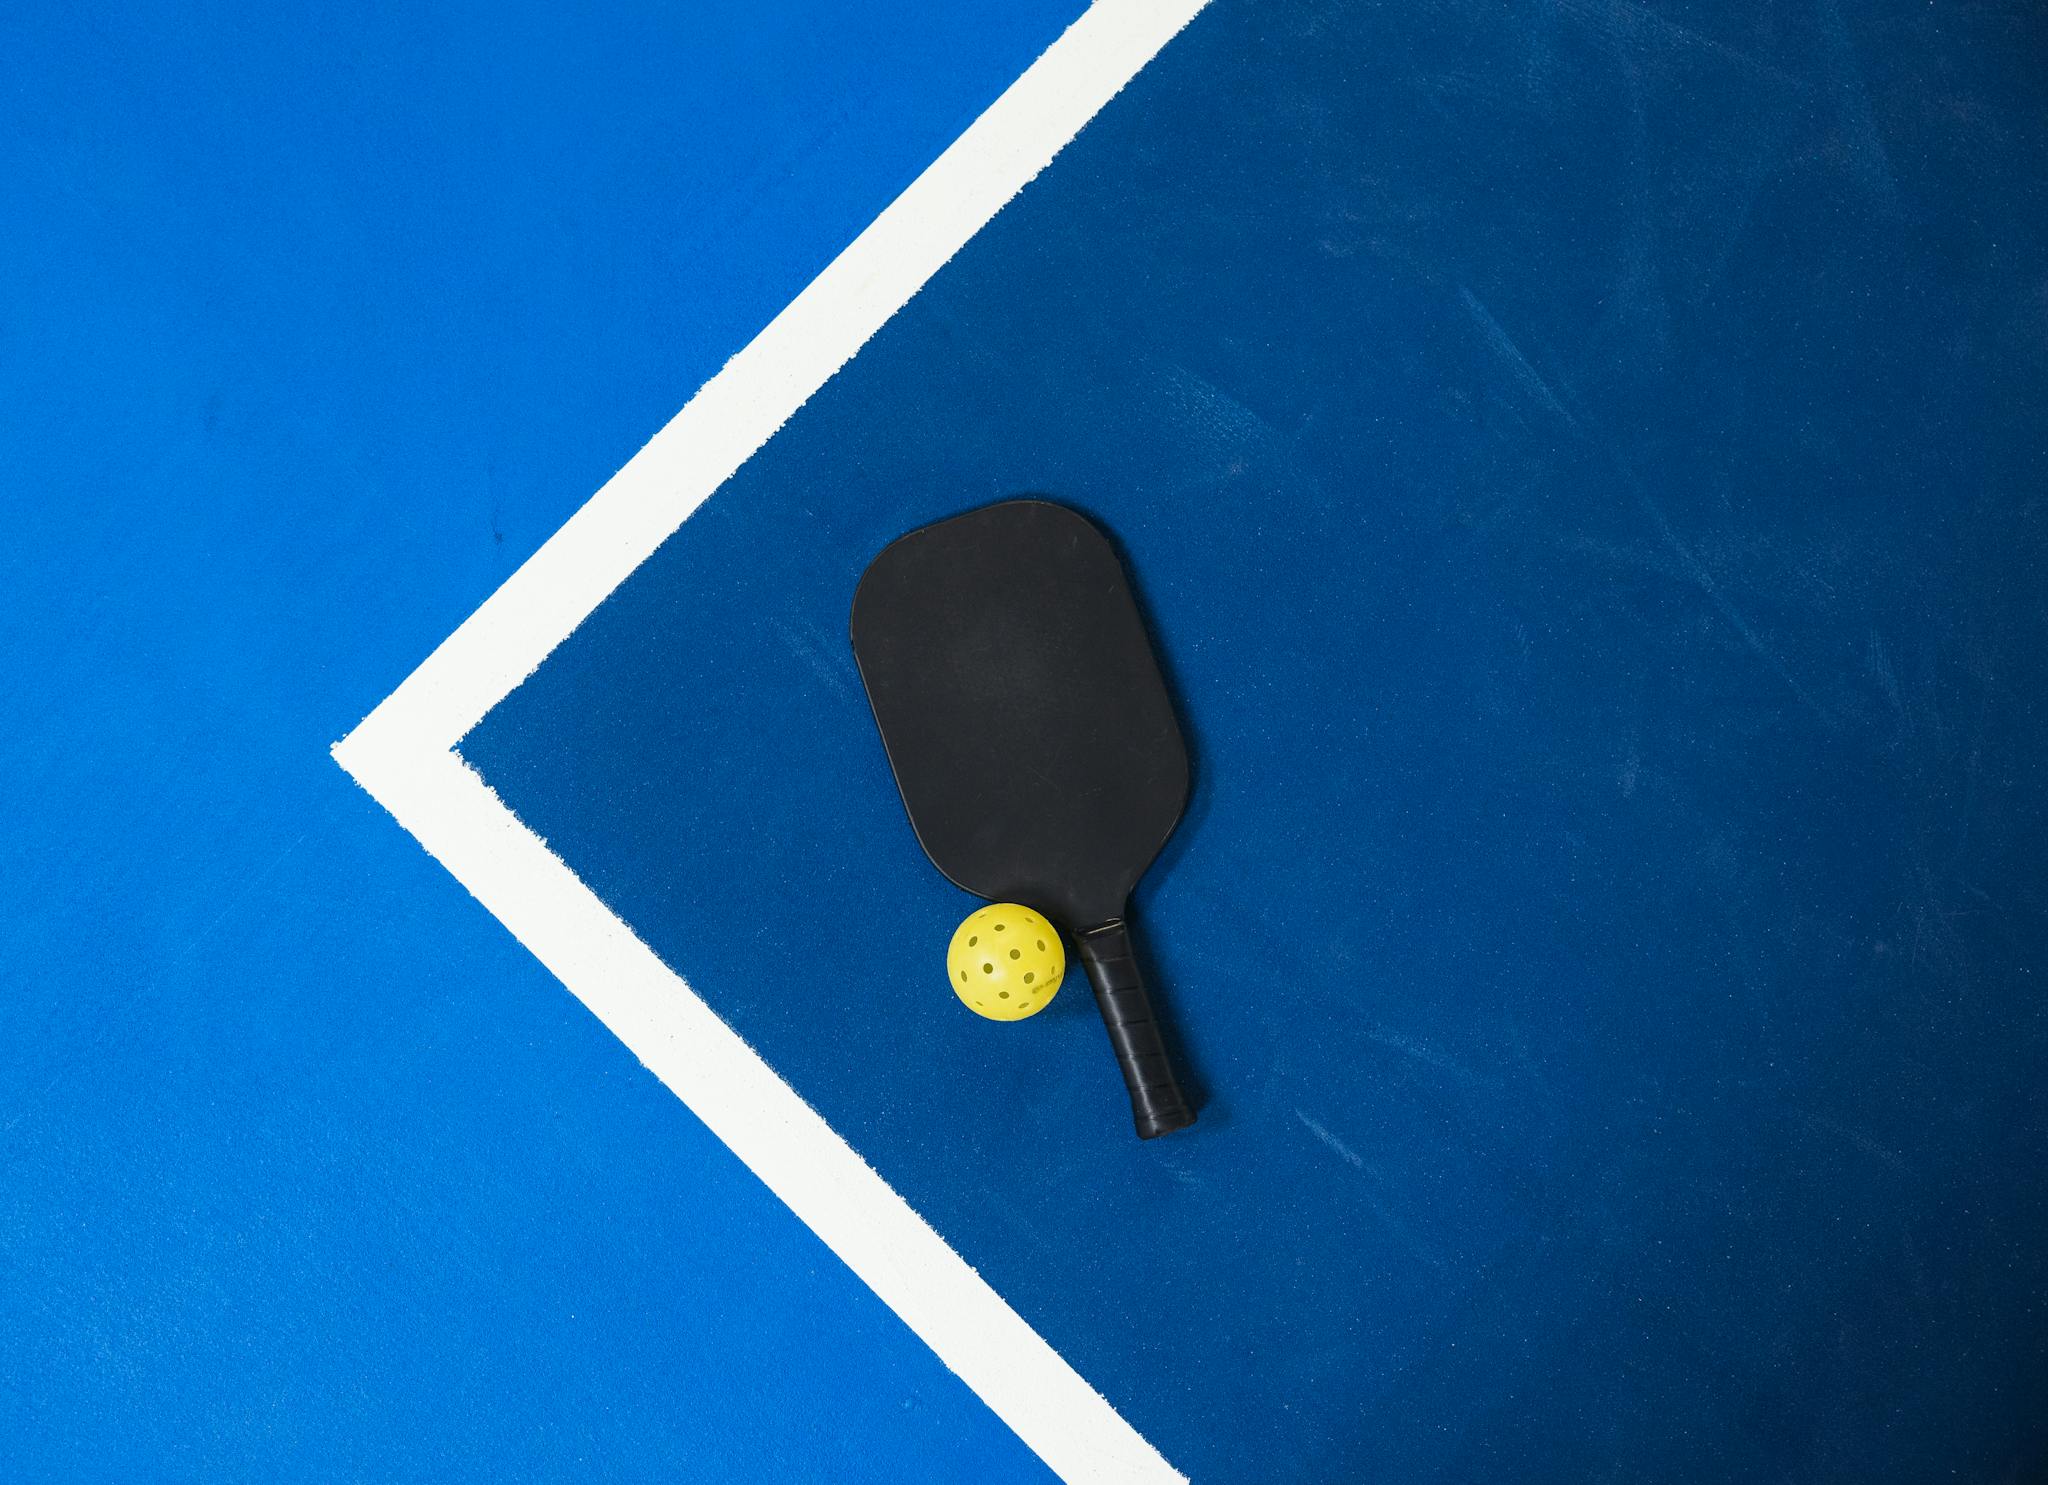 Pickleball Paddle, Ball & Court - how did pickleball get its name